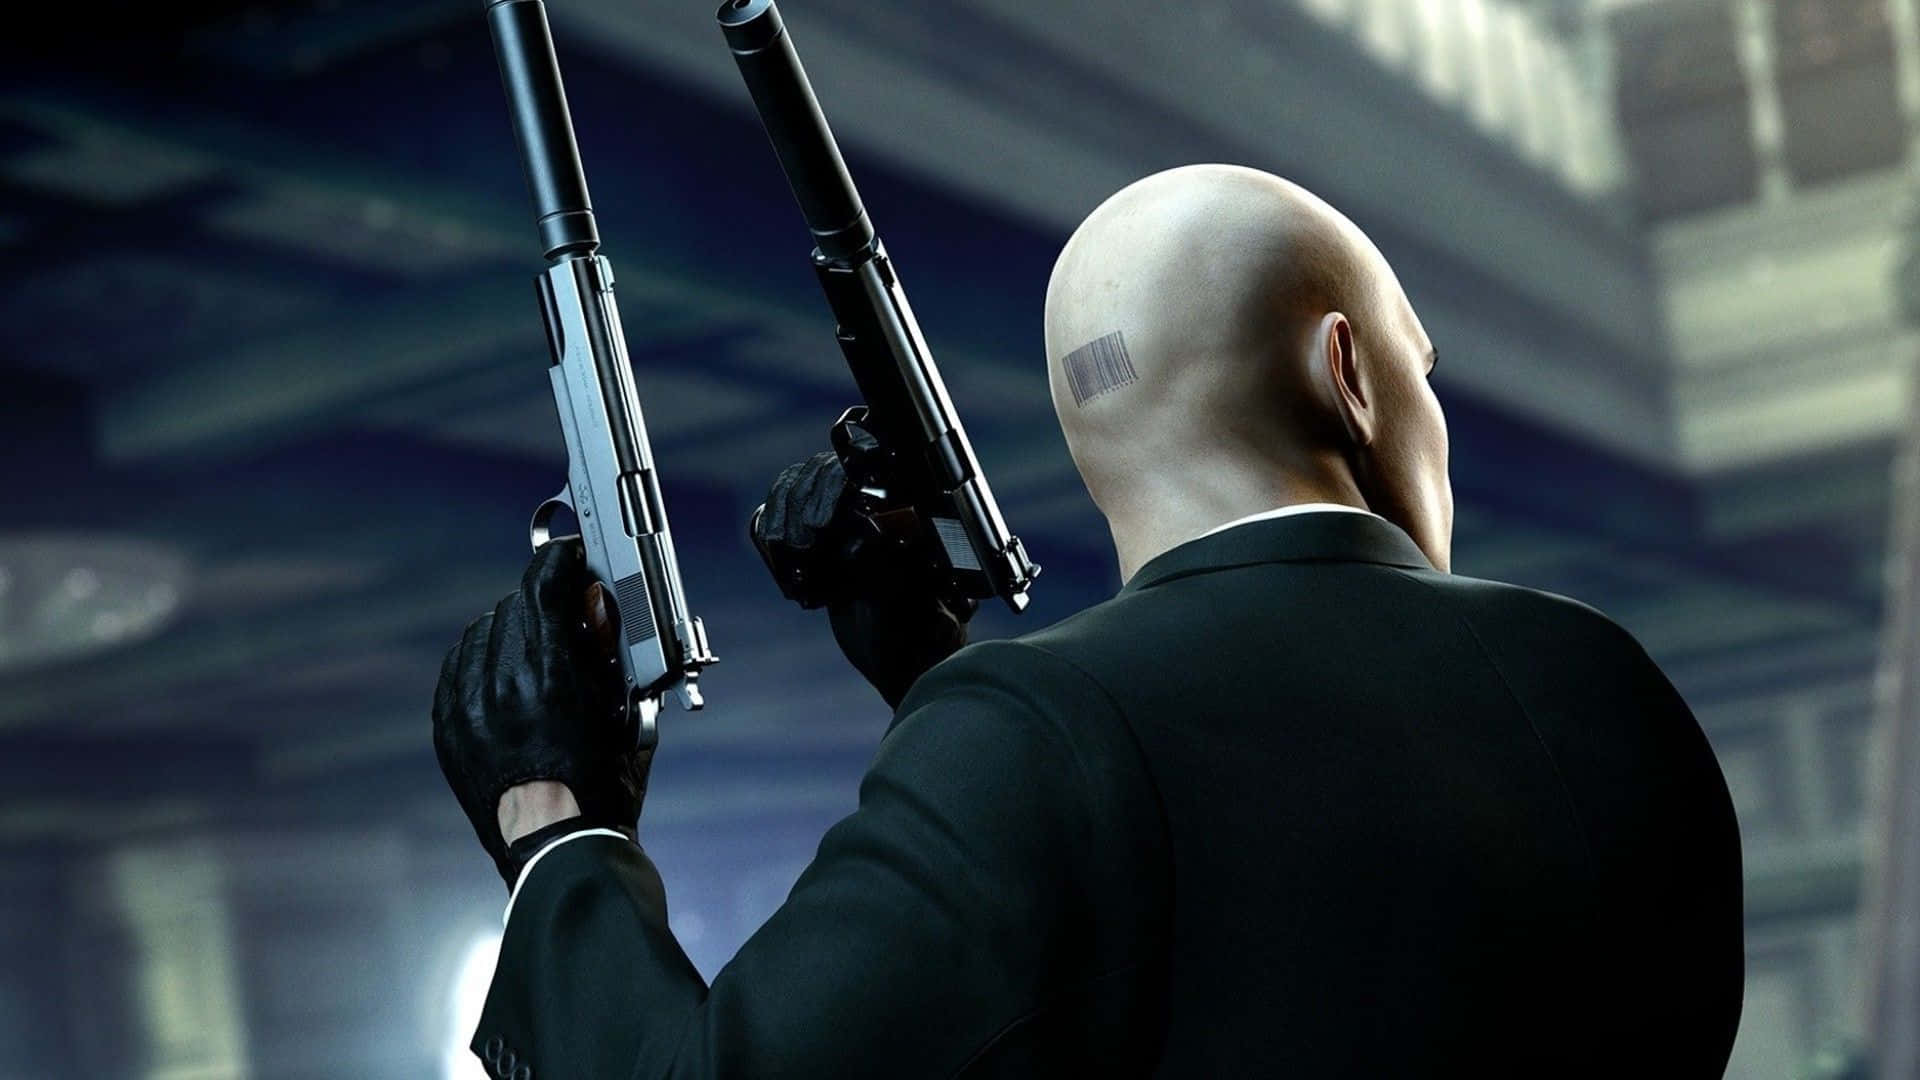 “Step into the shoes of Agent 47 in Hitman Absolution”